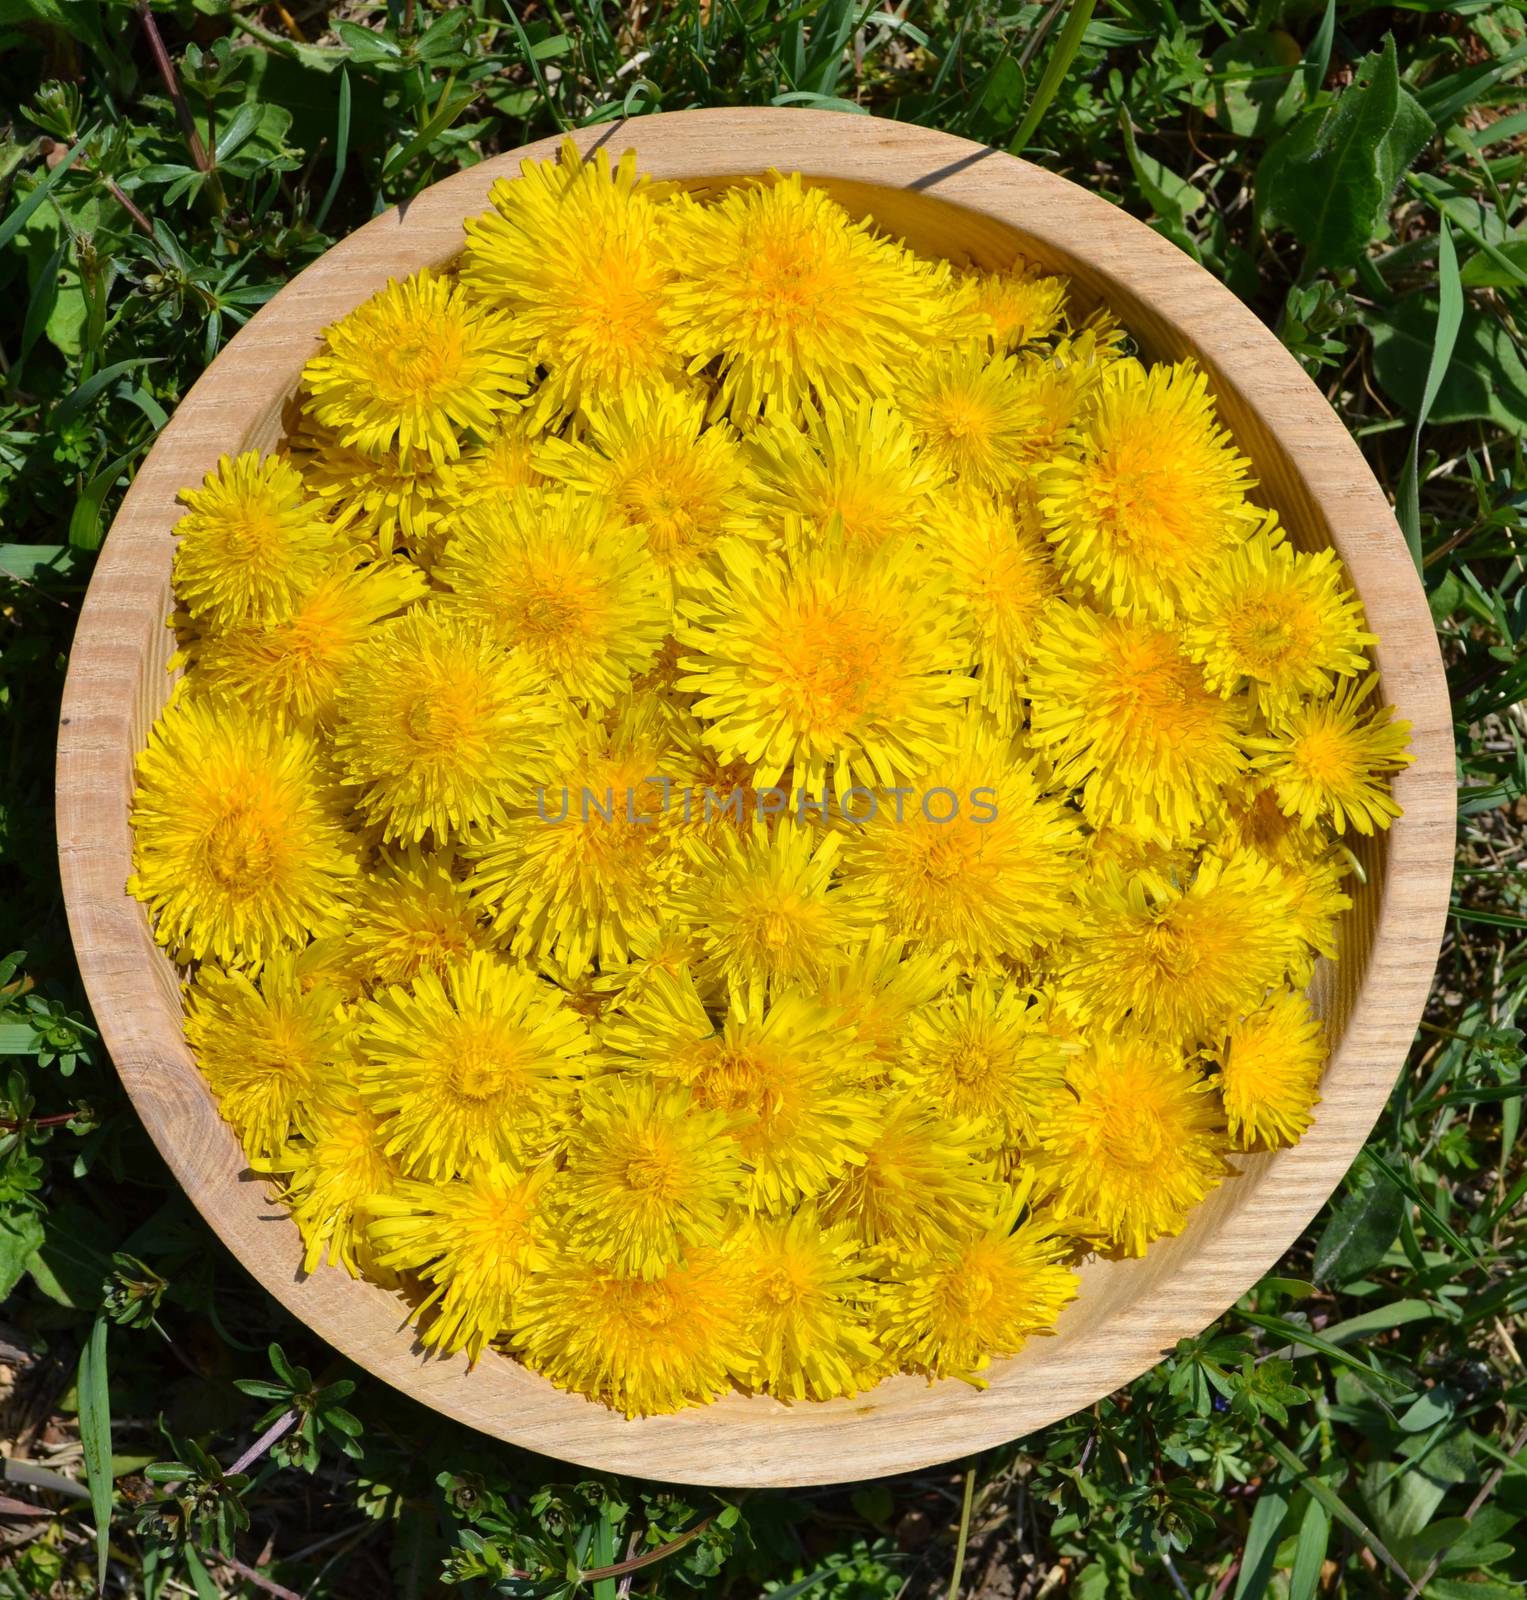 Lot of Taraxacum officinale flowers in a wooden bowl on the grass